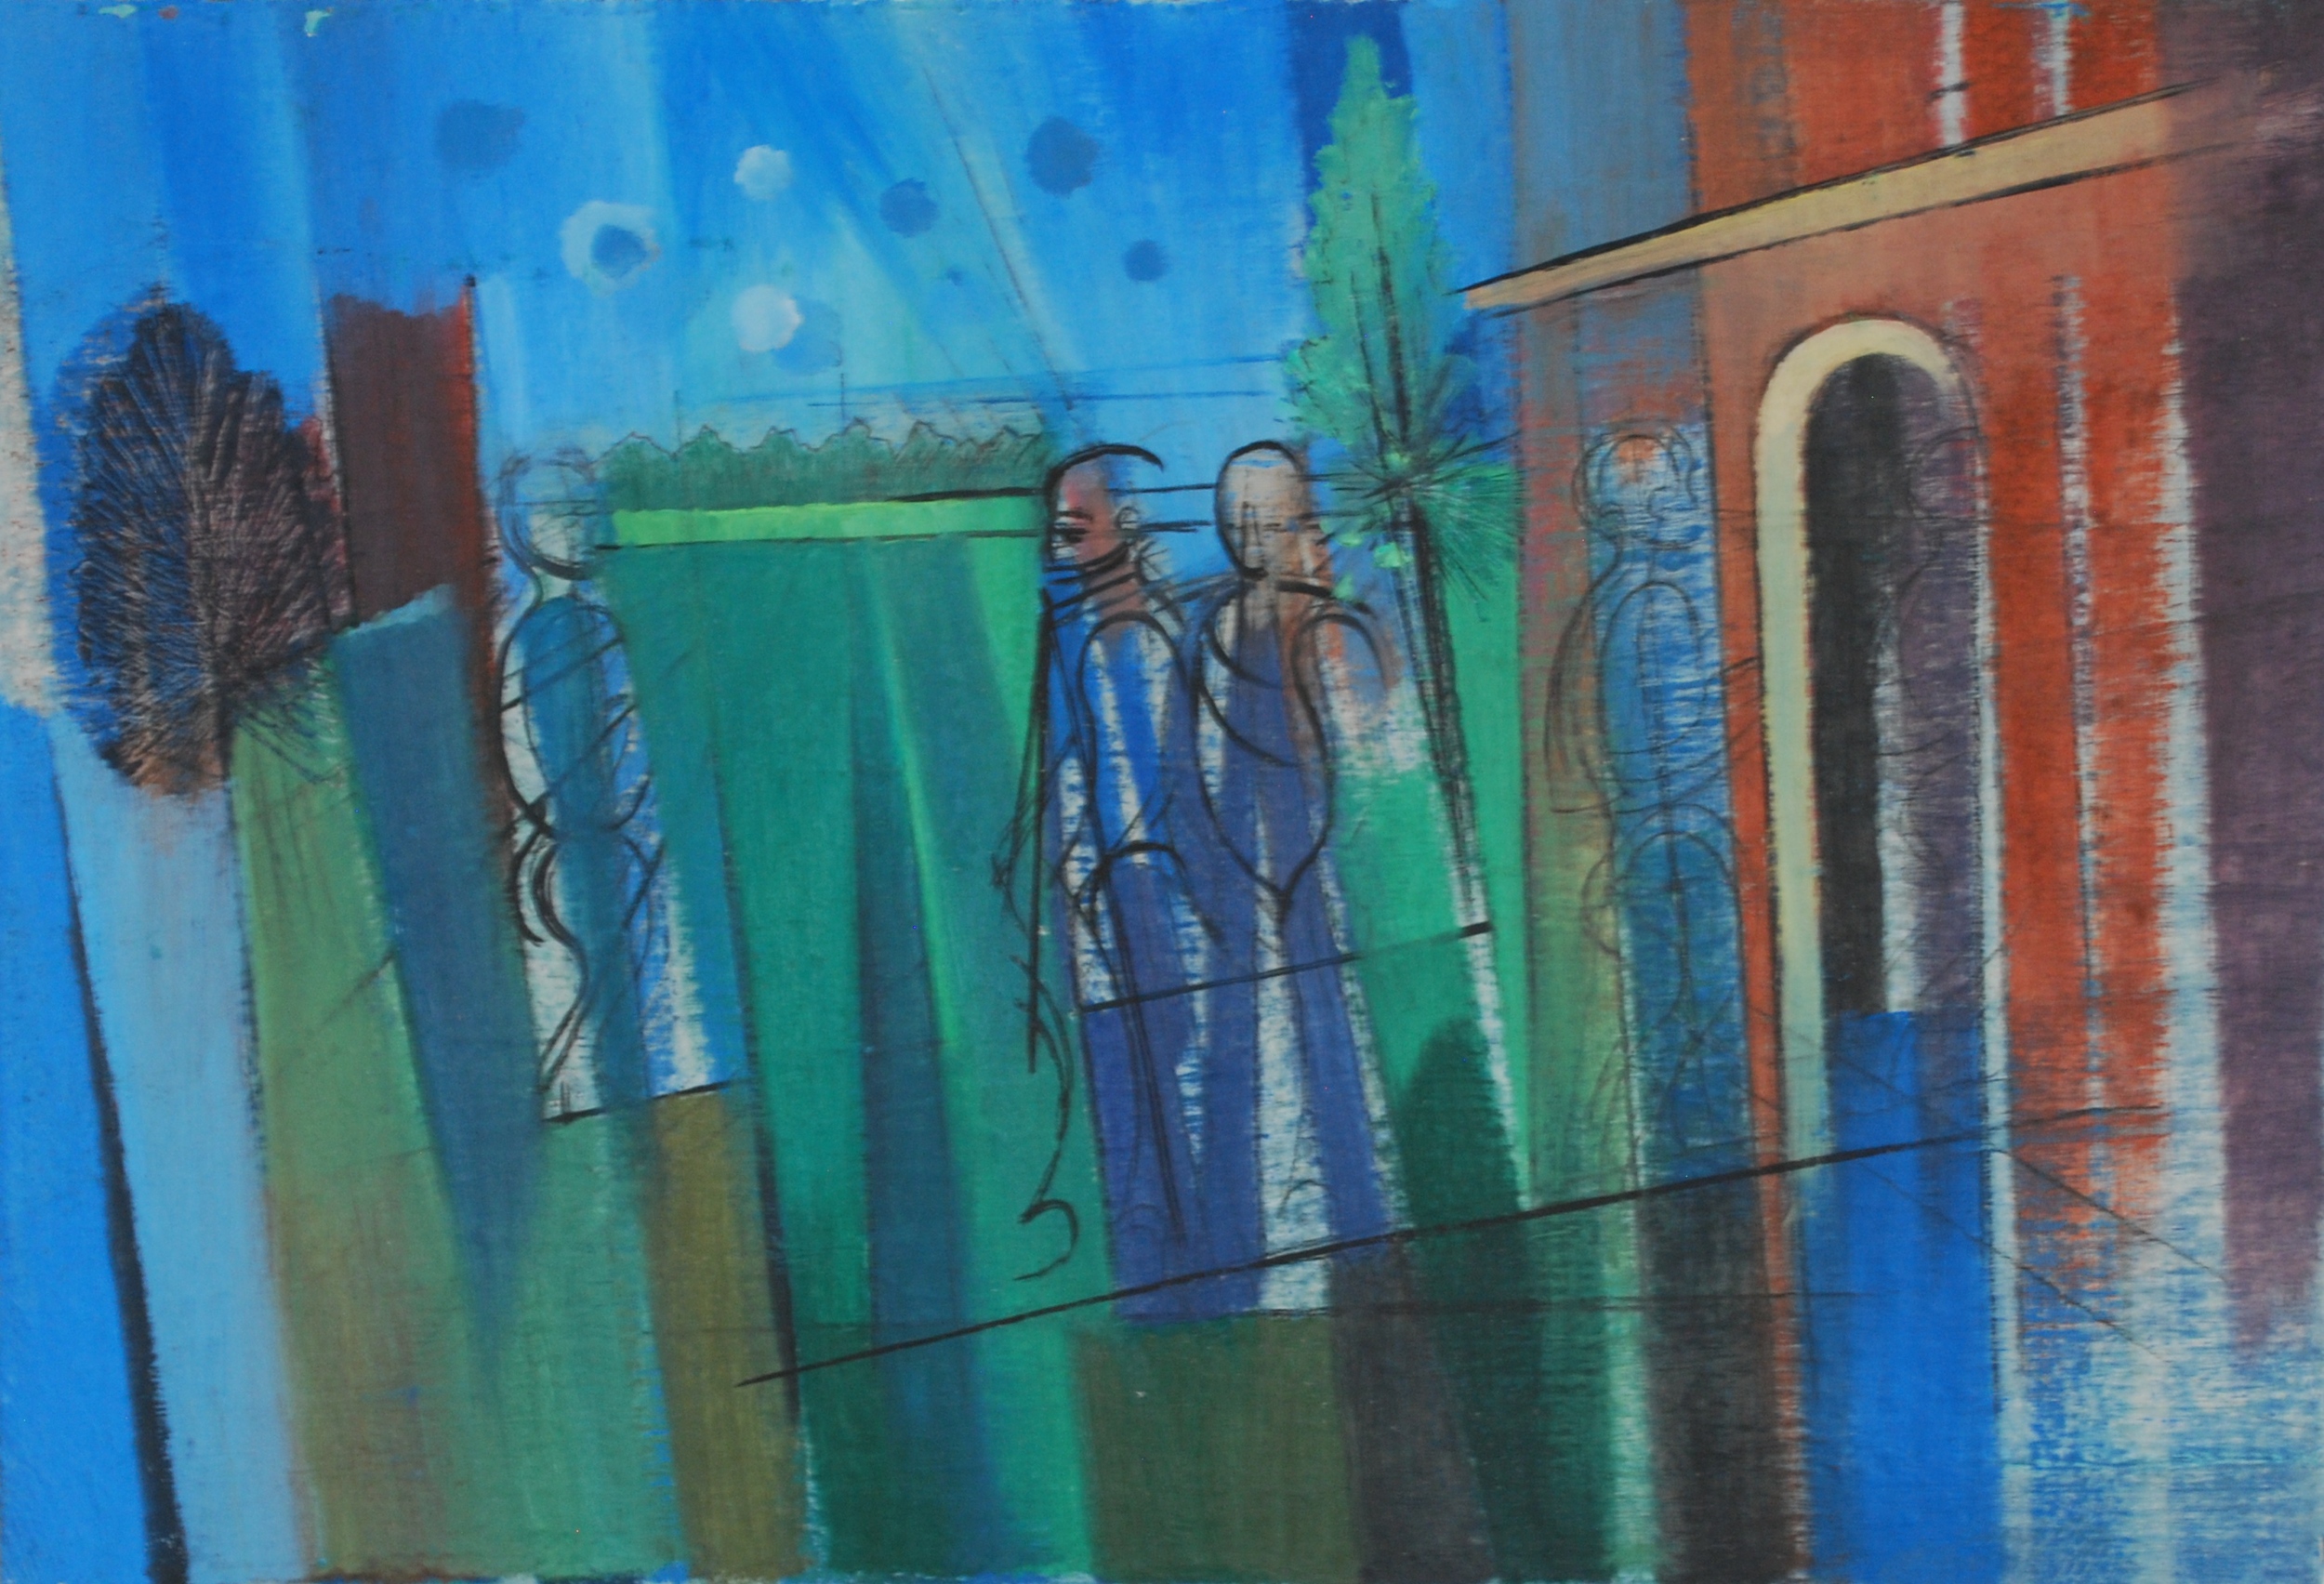  Figures in Landcape with Archway, c1990 Oil on Canvas Board, 66 x 45 cm 